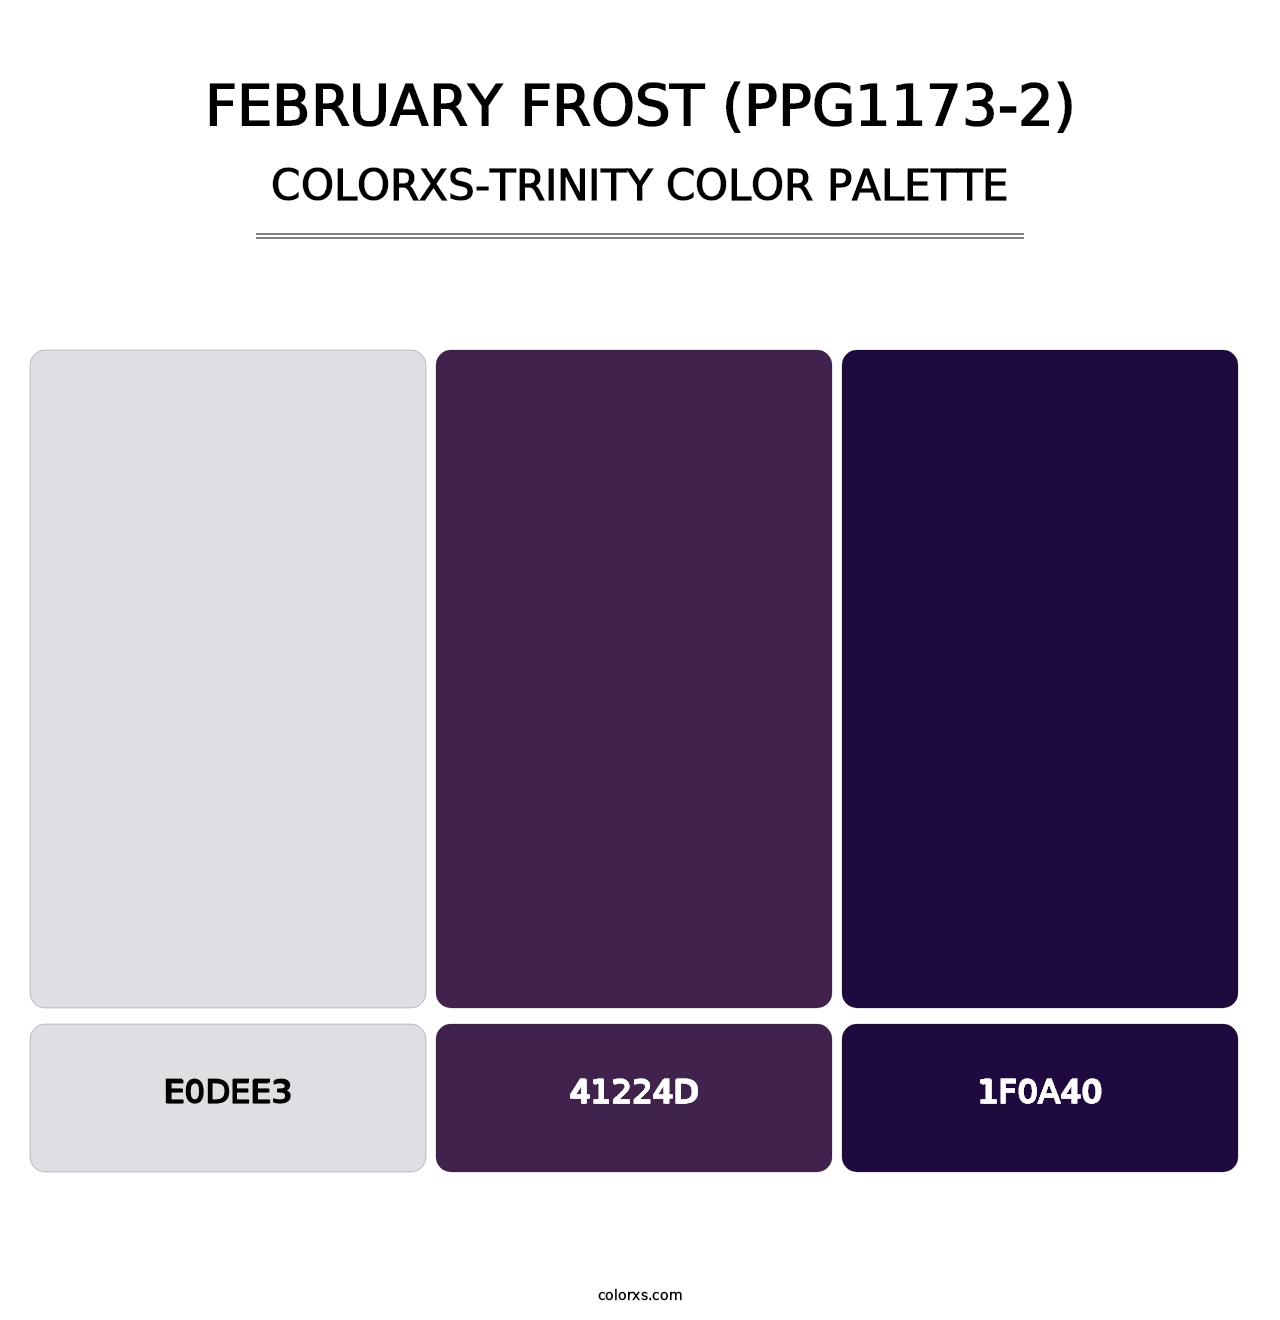 February Frost (PPG1173-2) - Colorxs Trinity Palette